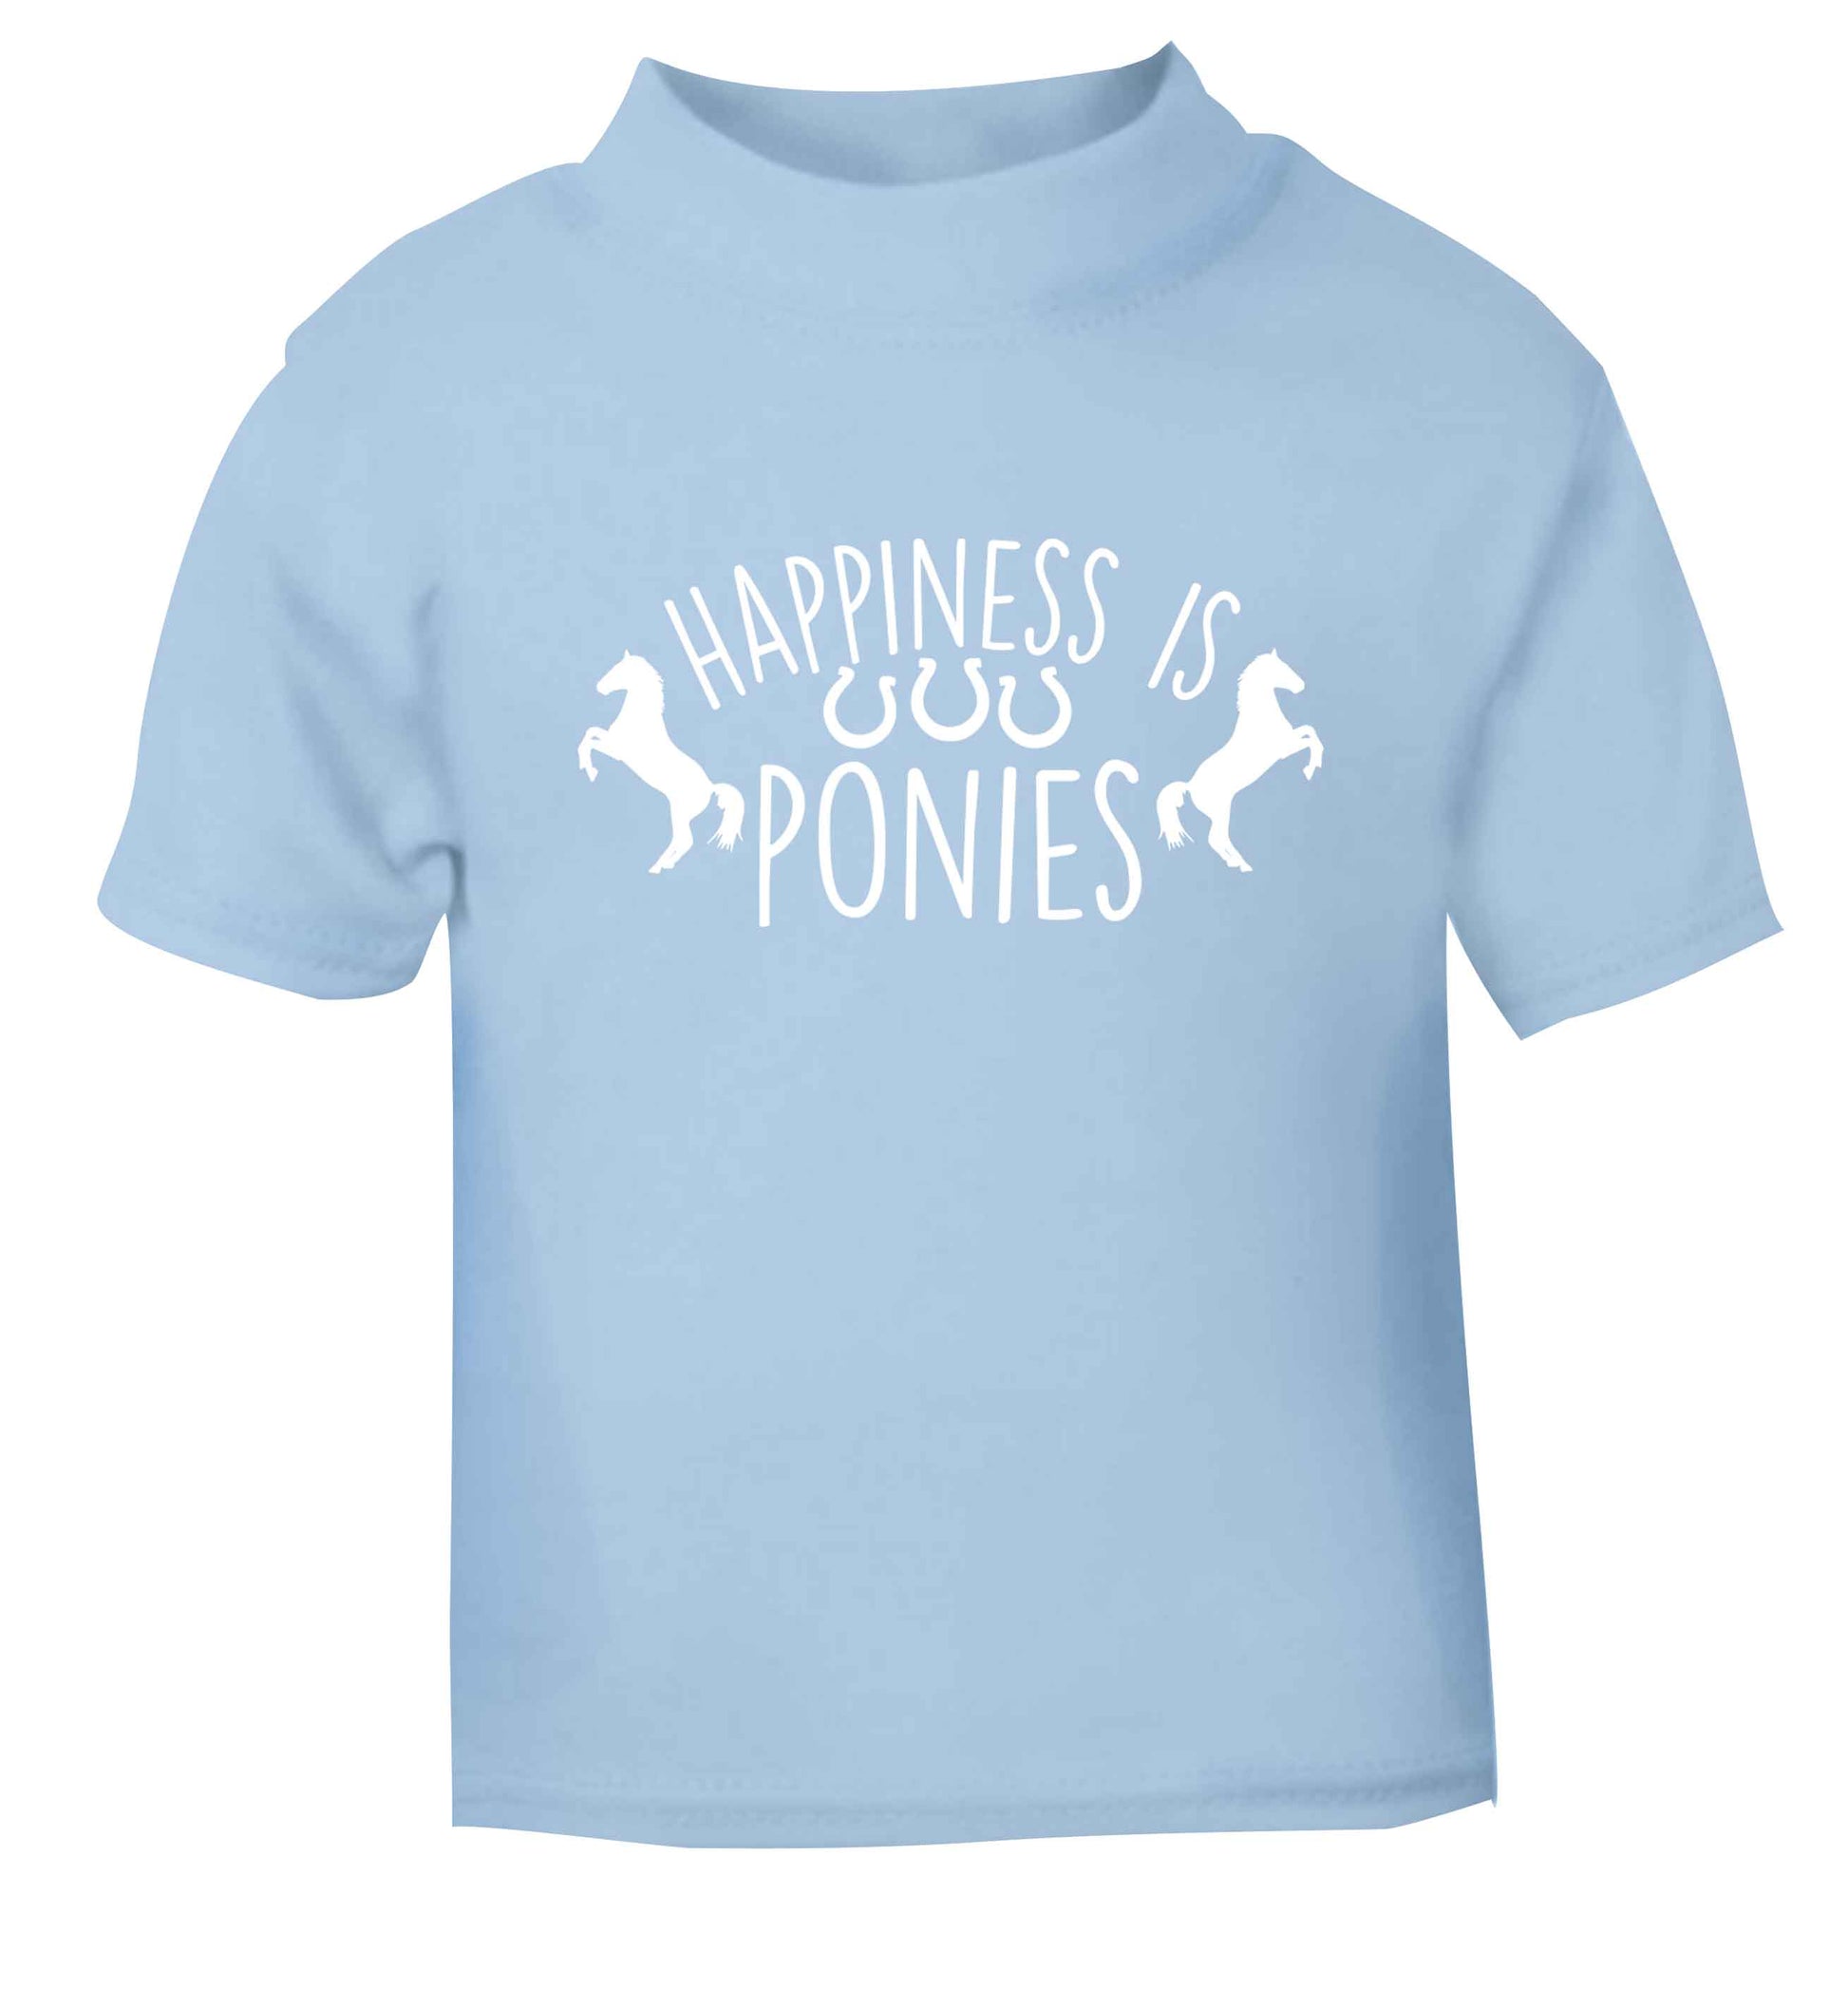 Happiness is ponies light blue baby toddler Tshirt 2 Years